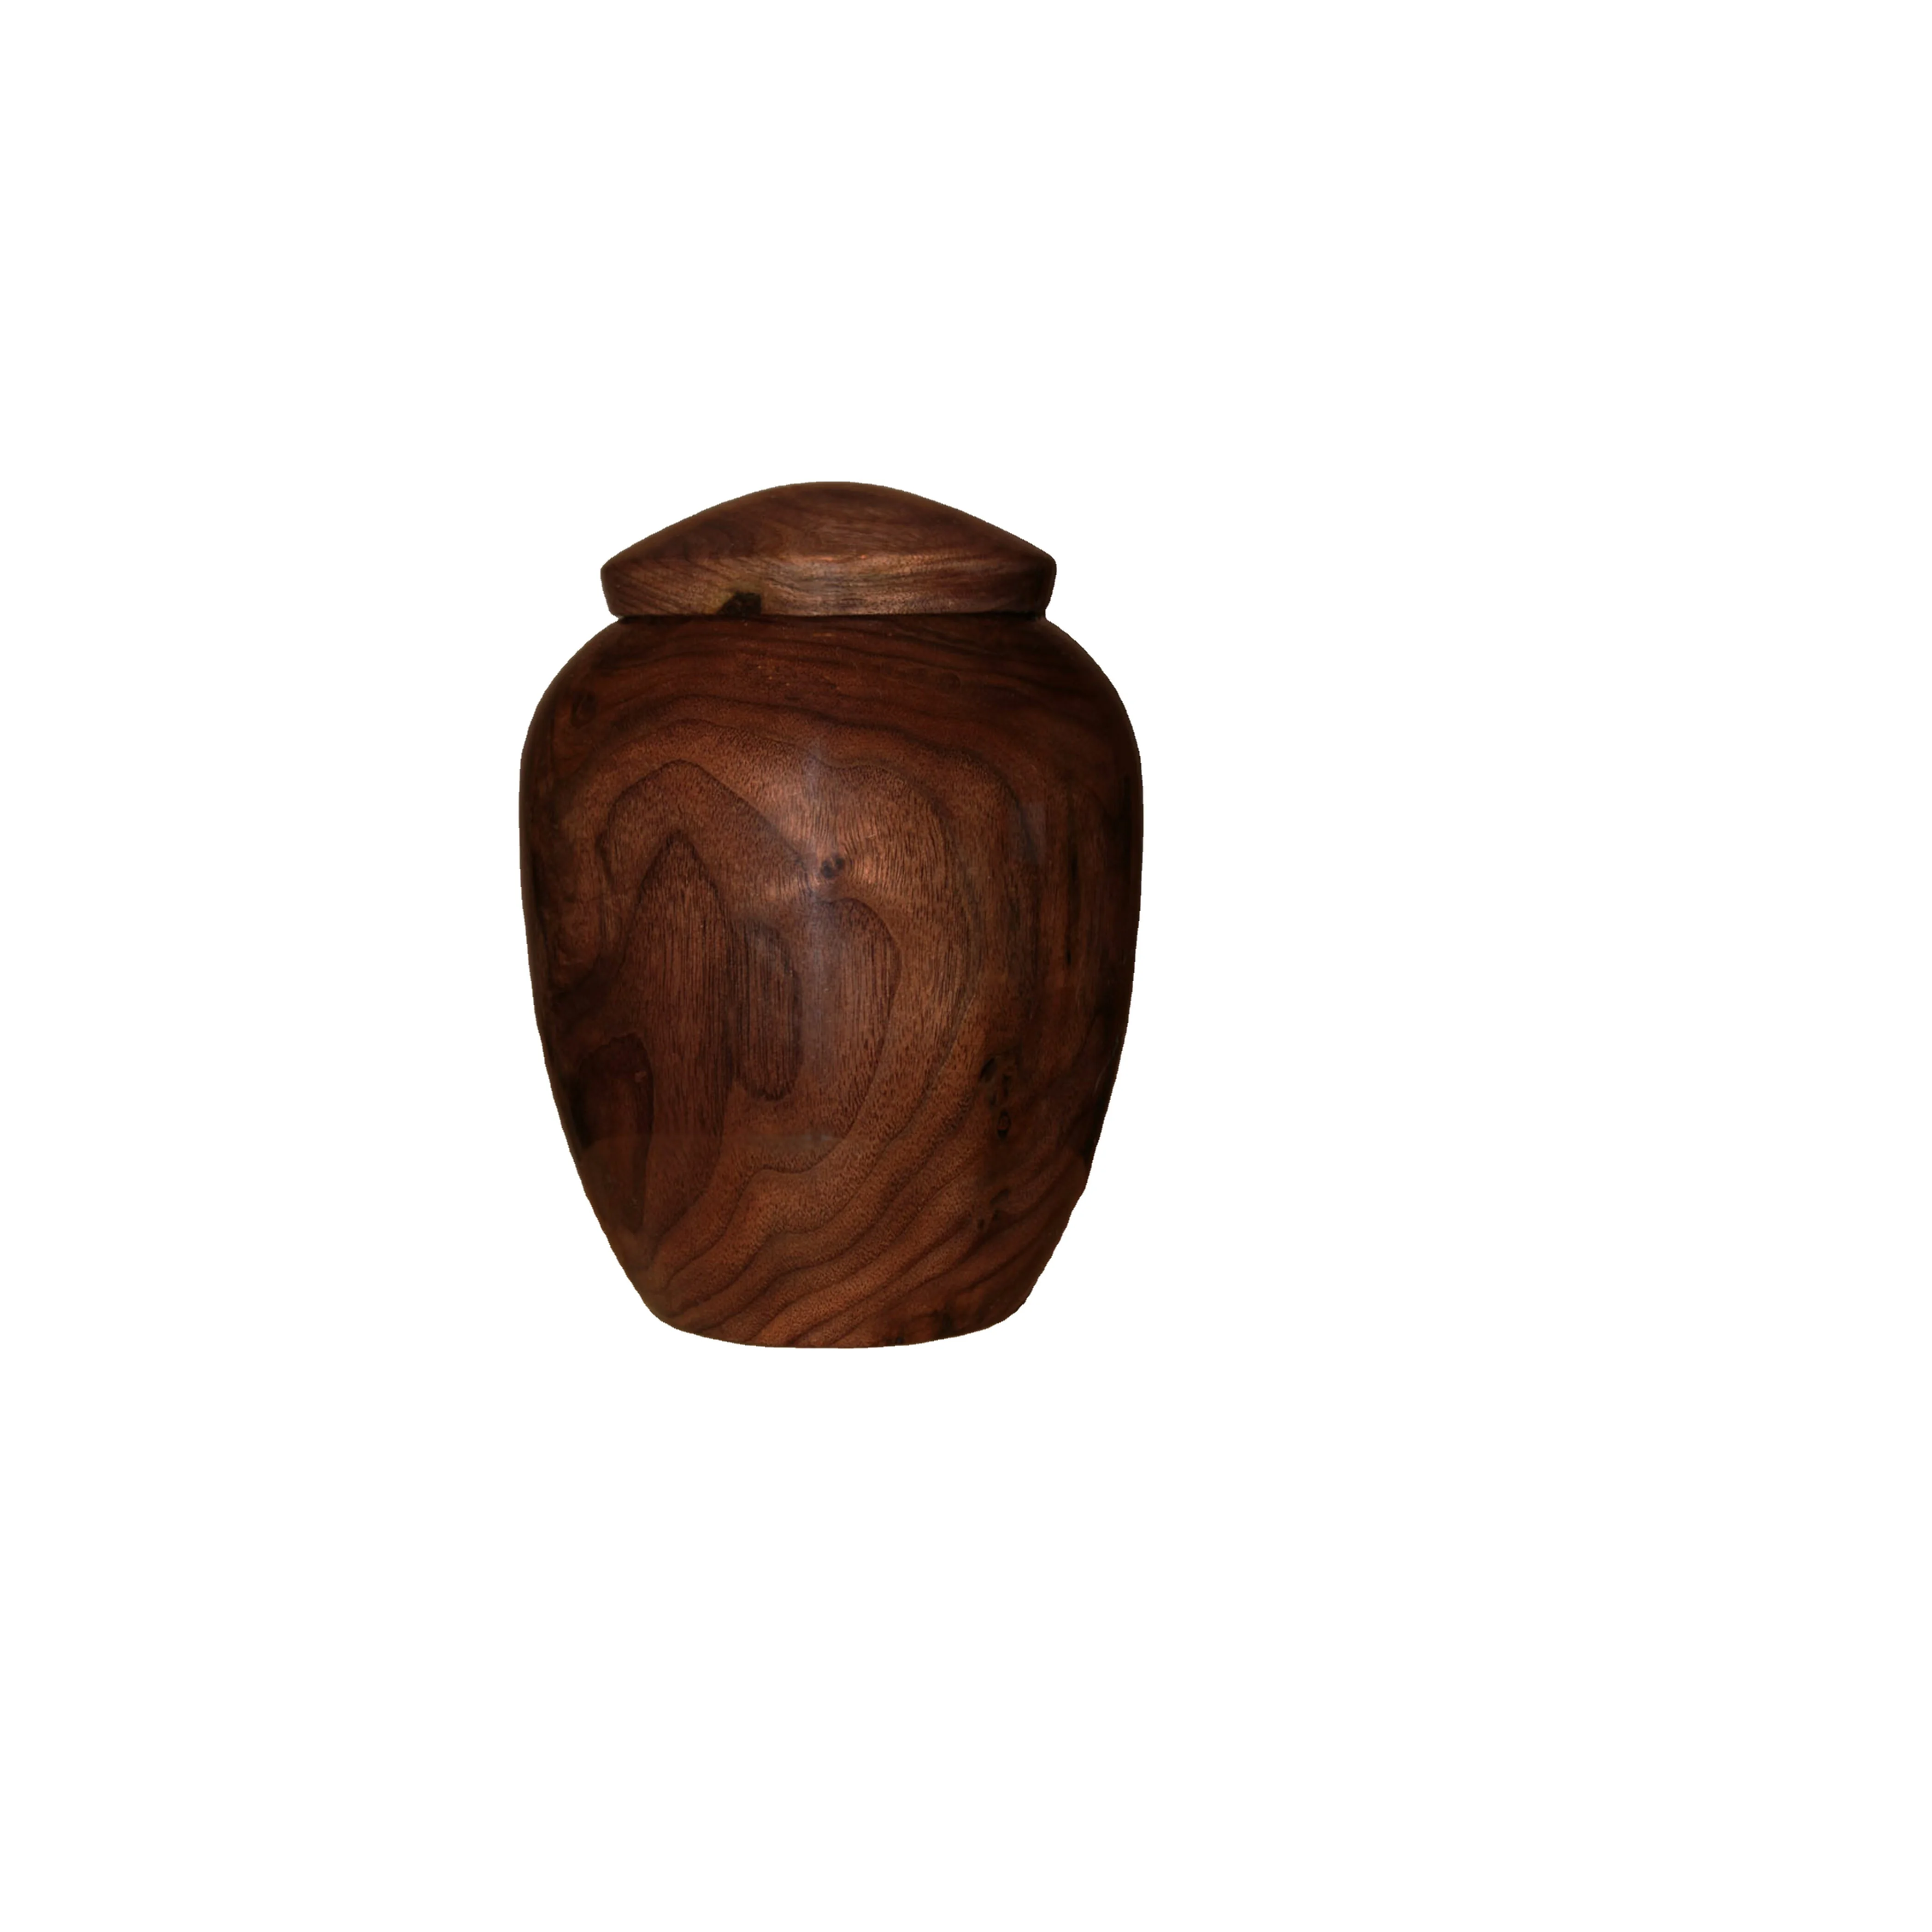 Standard quality wooden cremation urns for human ashes funeral urn wood pet urns wooden box customized shape